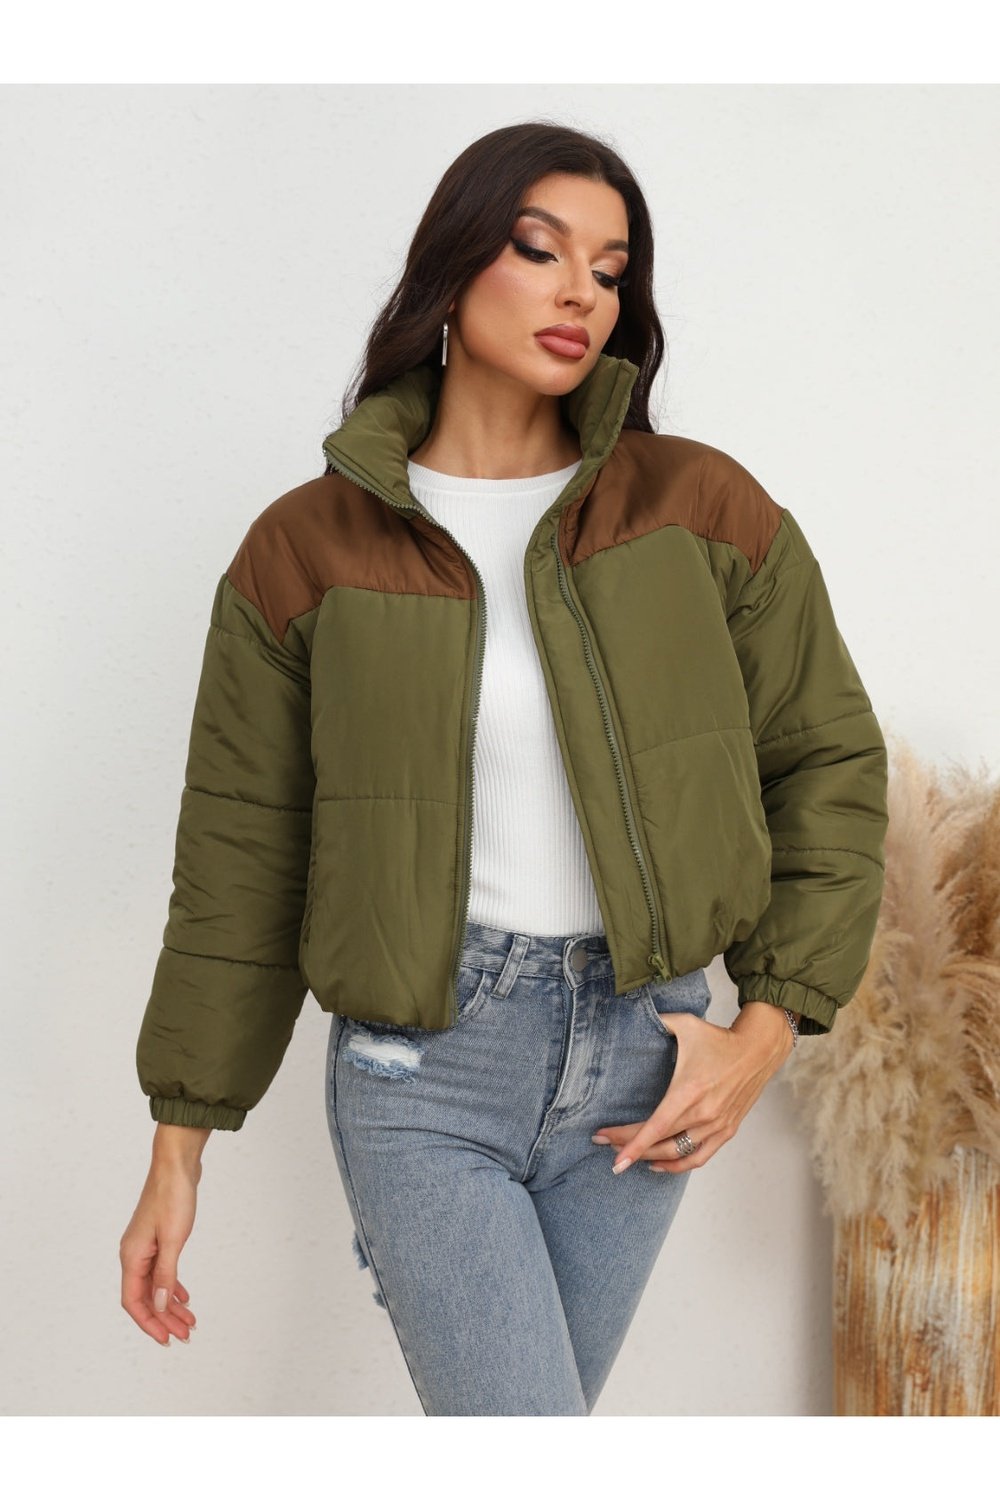 Two-Tone Zip-Up Puffer Jacket - Jackets - FITGGINS